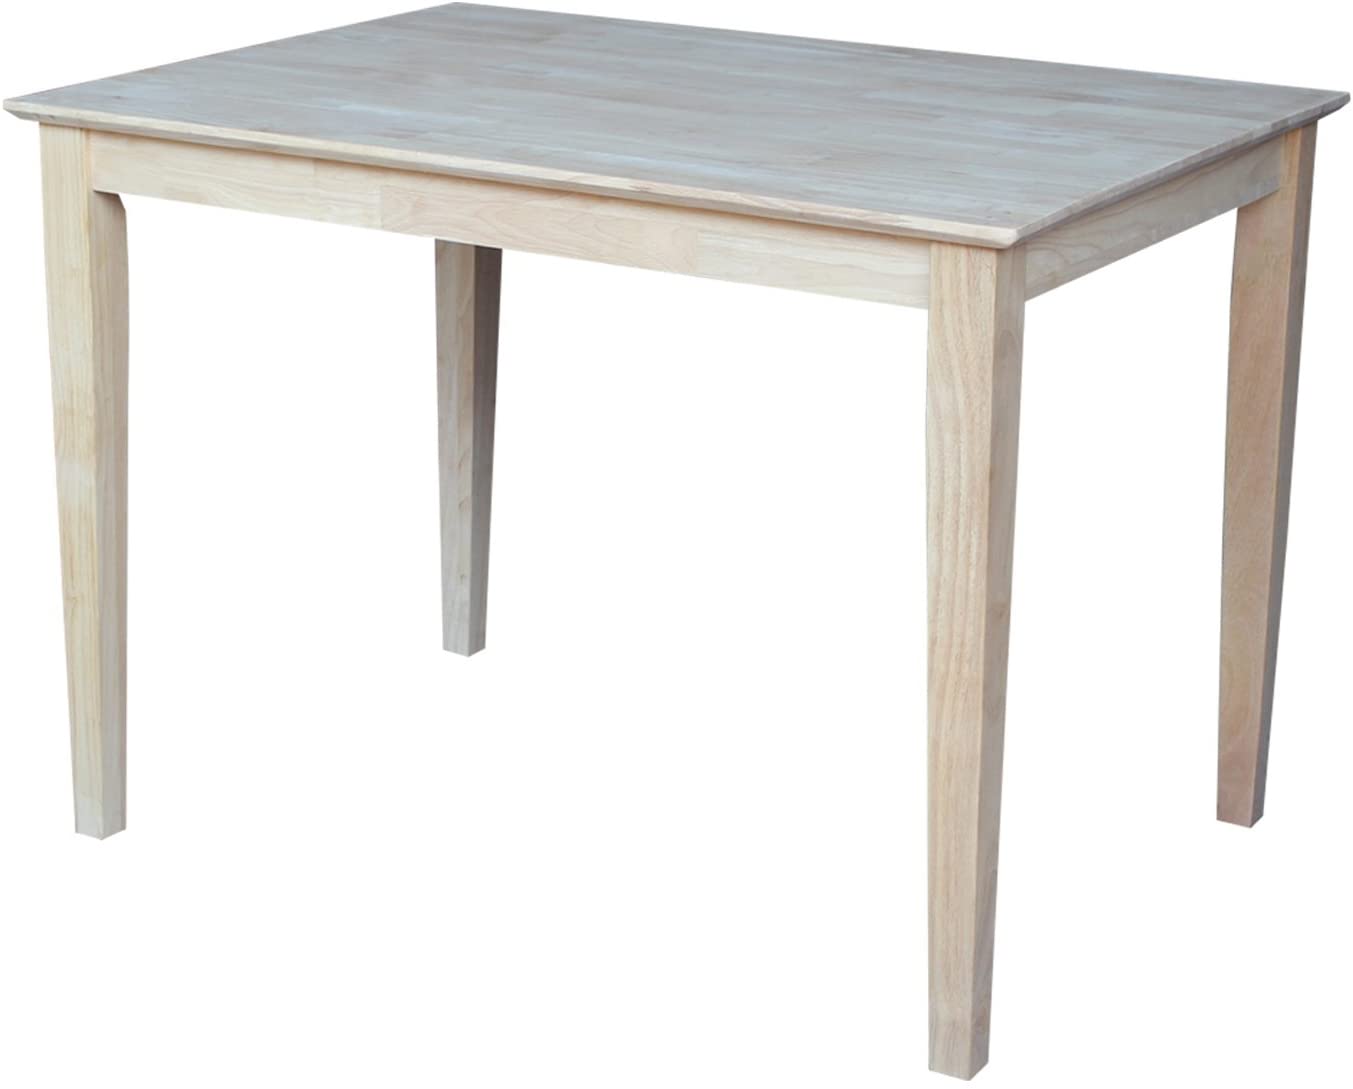 B00ABDYV7Y International Concepts Solid Wood Top Table with Shaker Legs, Standard Height